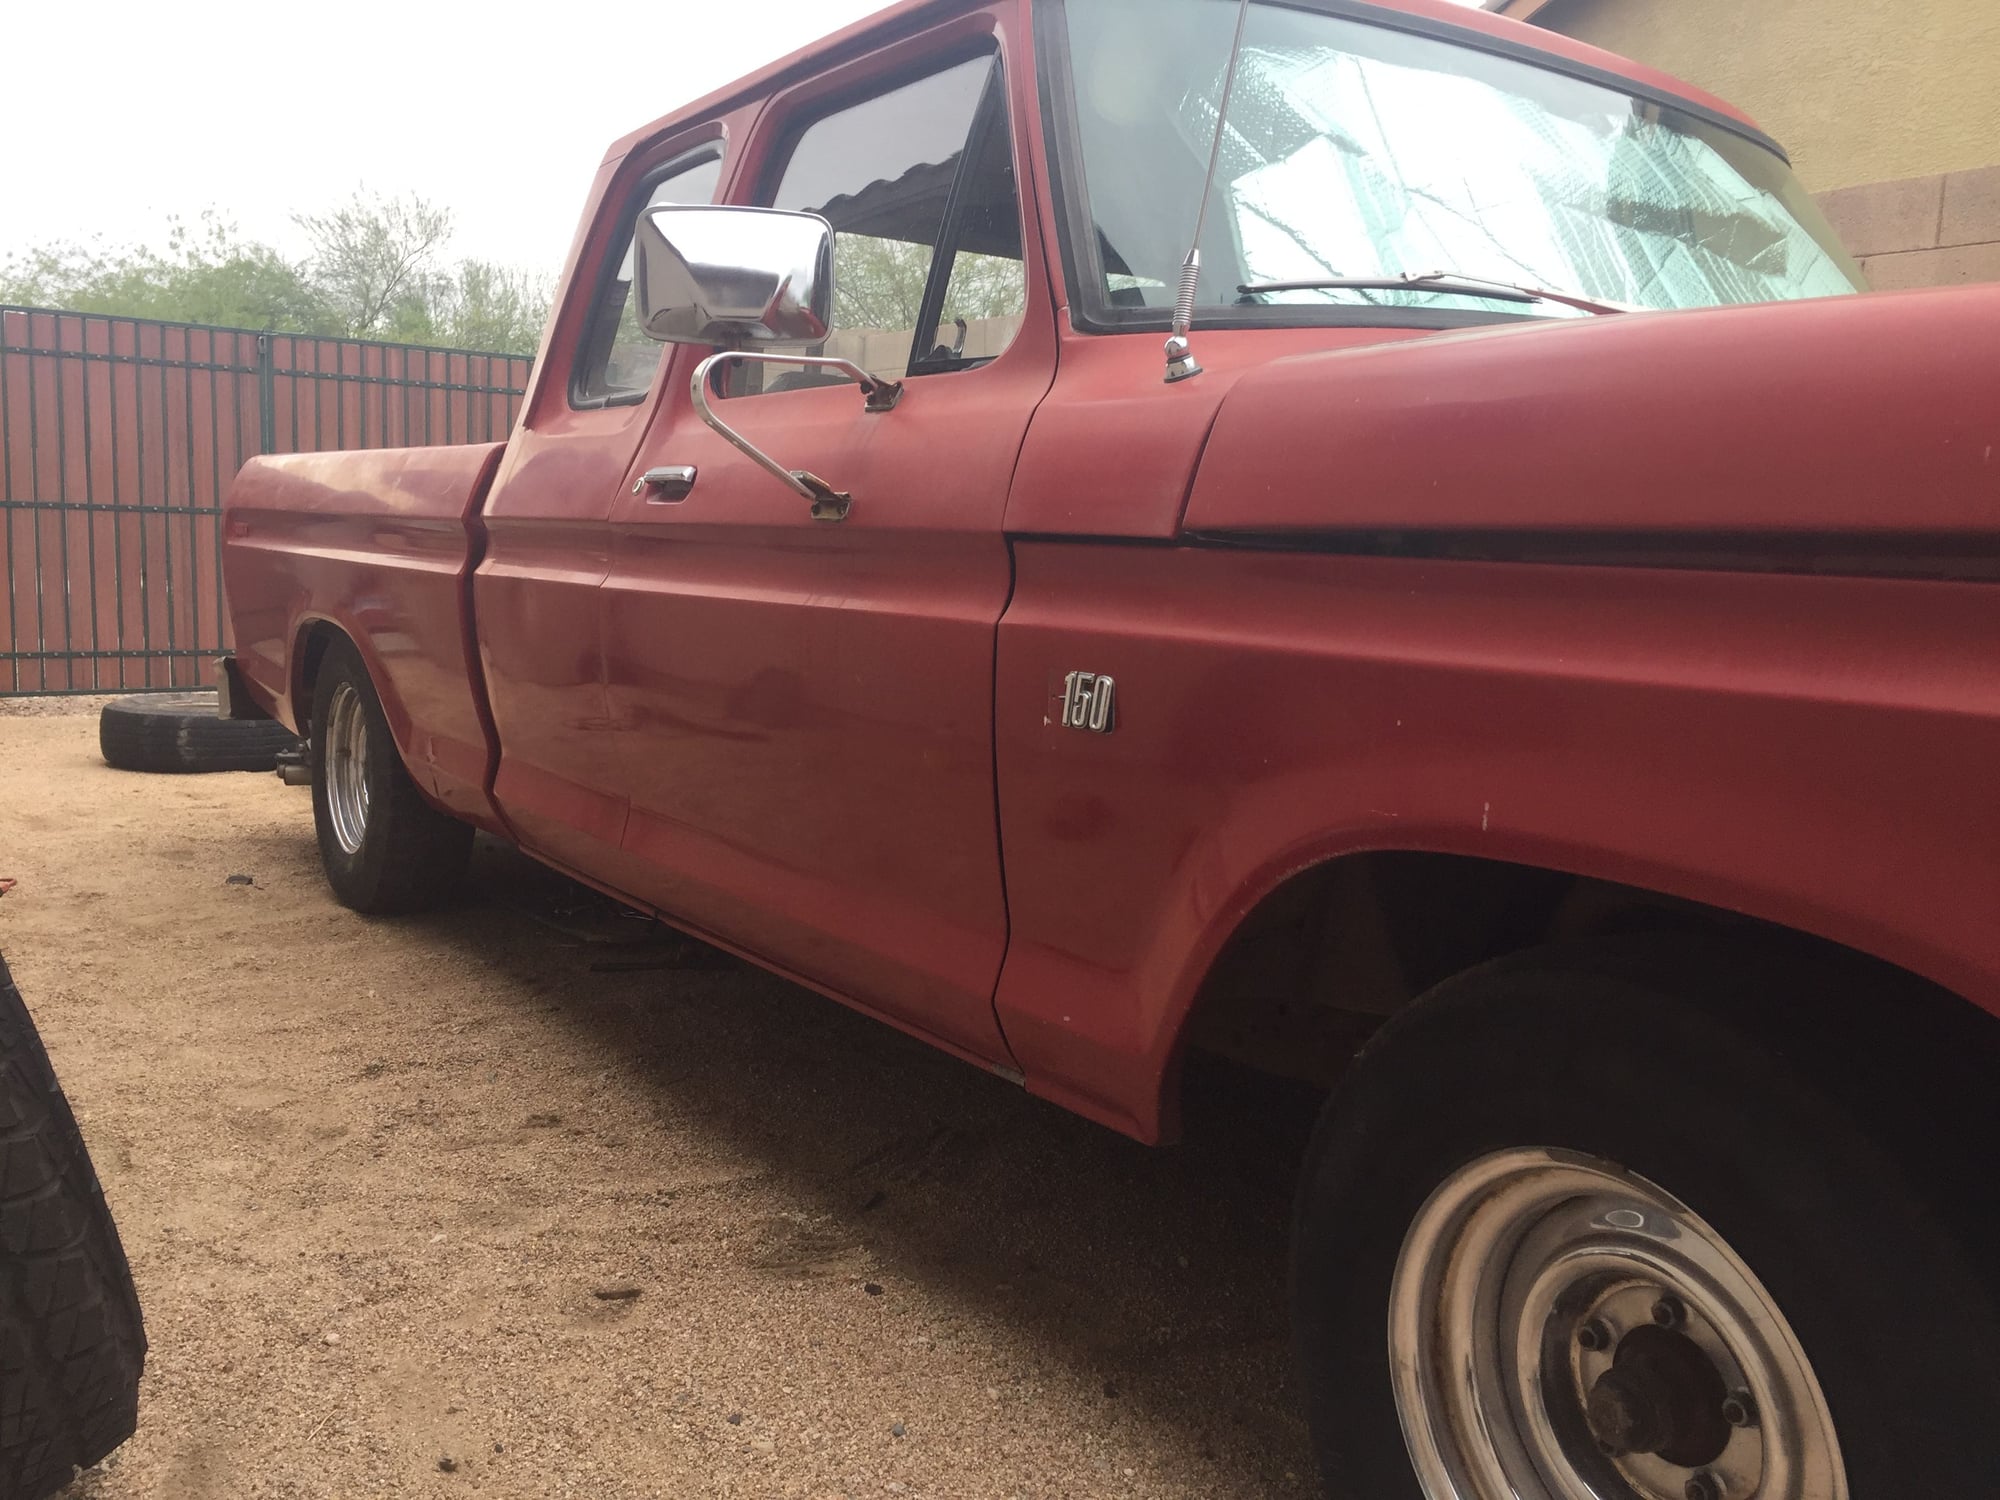 Miscellaneous - 1976 F150 Parts For Sale - Used - 1973 to 1979 Ford 1/2 Ton Pickup - Anthem, AZ 85086, United States